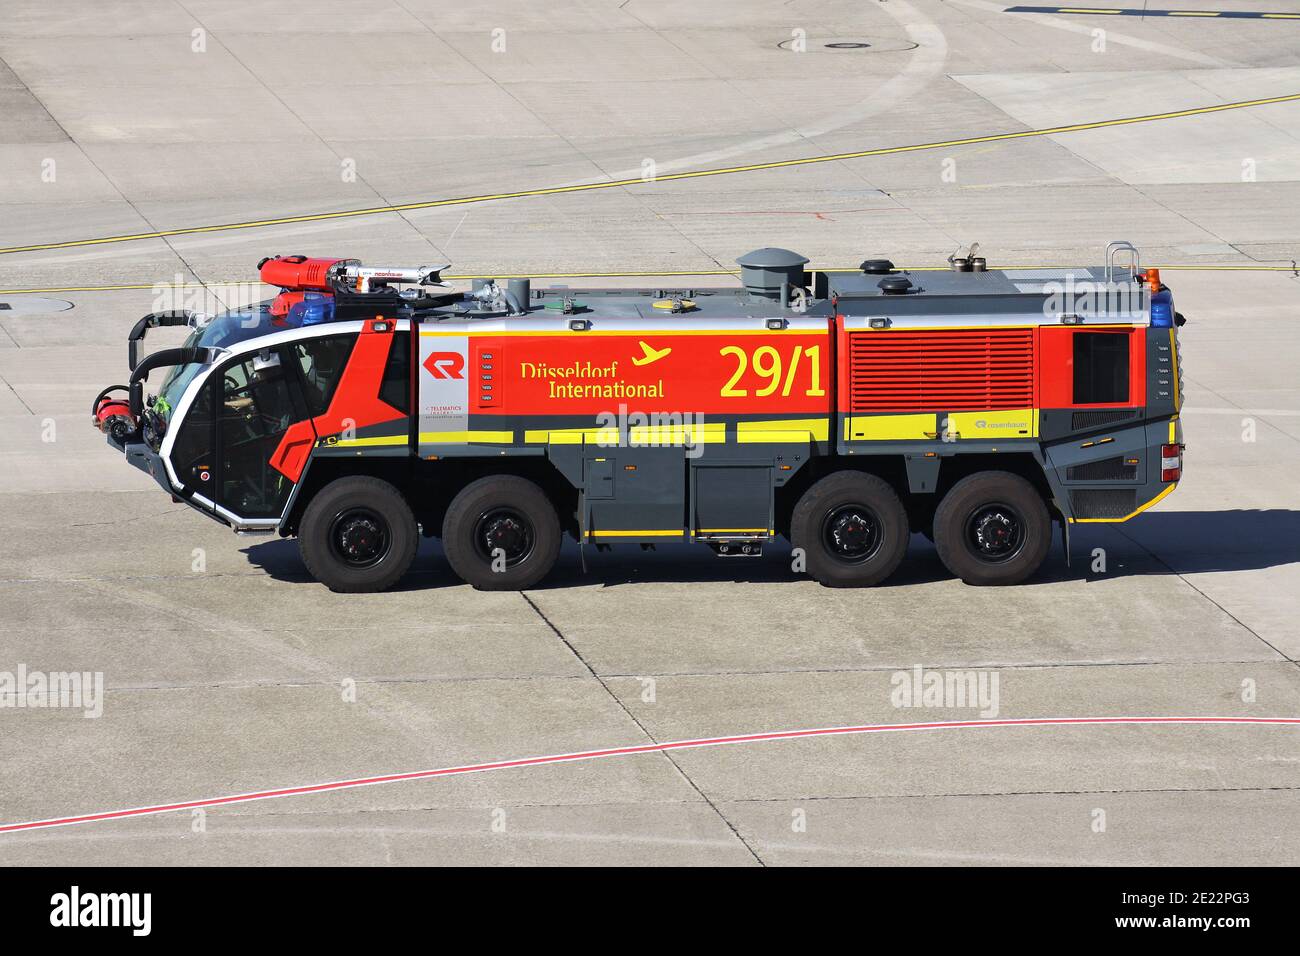 Rosenbauer Panther airport rescue and firefighting vehicle at Dusseldorf airport. Stock Photo